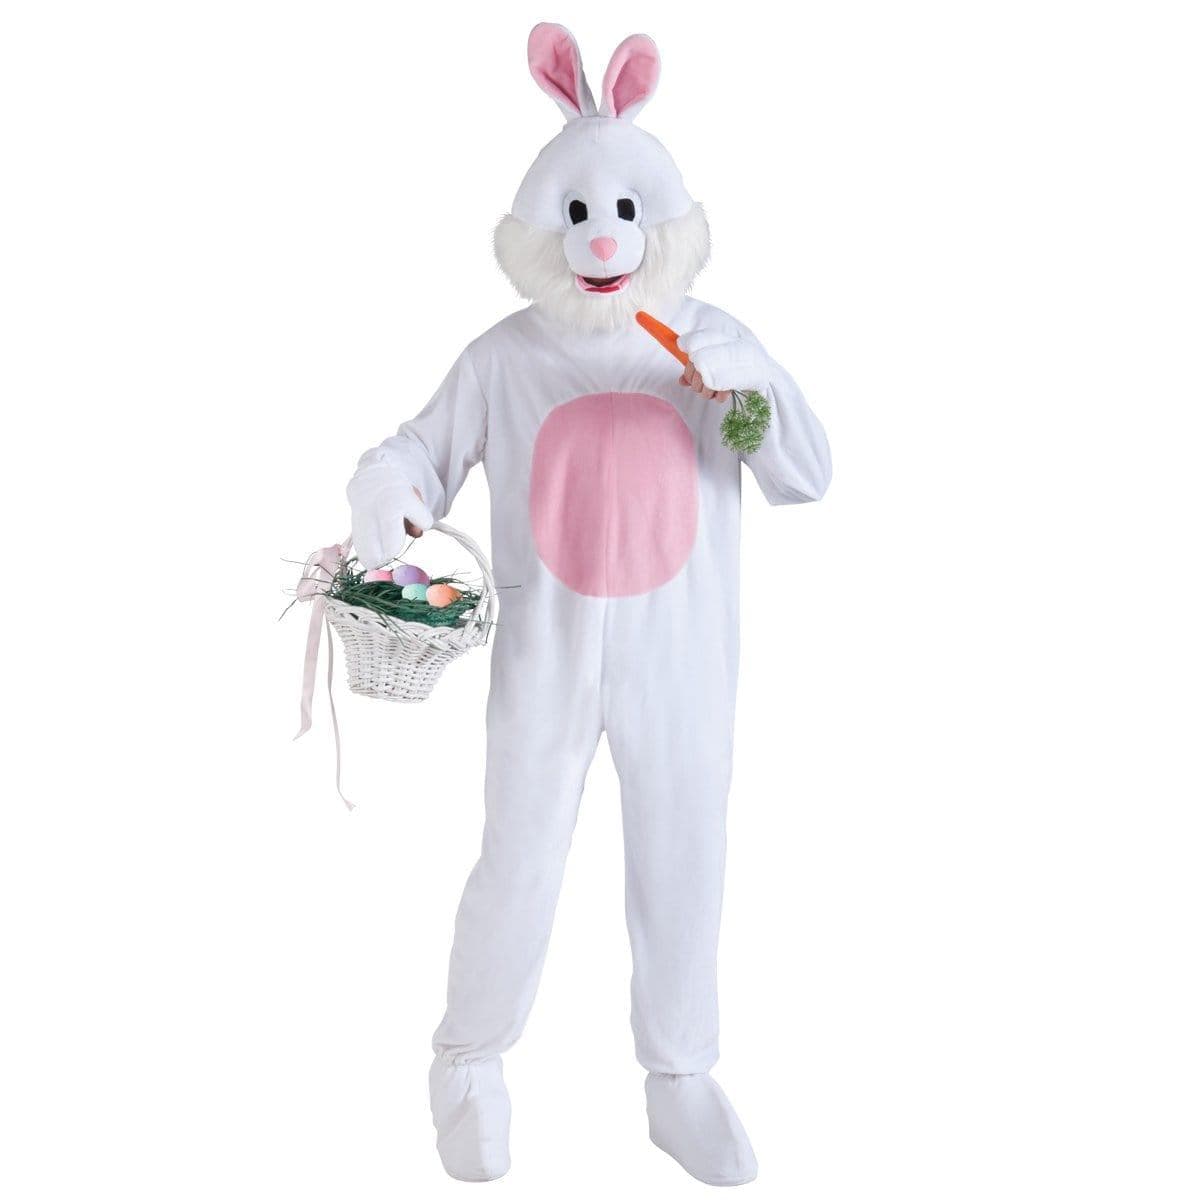 Buy Easter Bunny Mascot sold at Party Expert